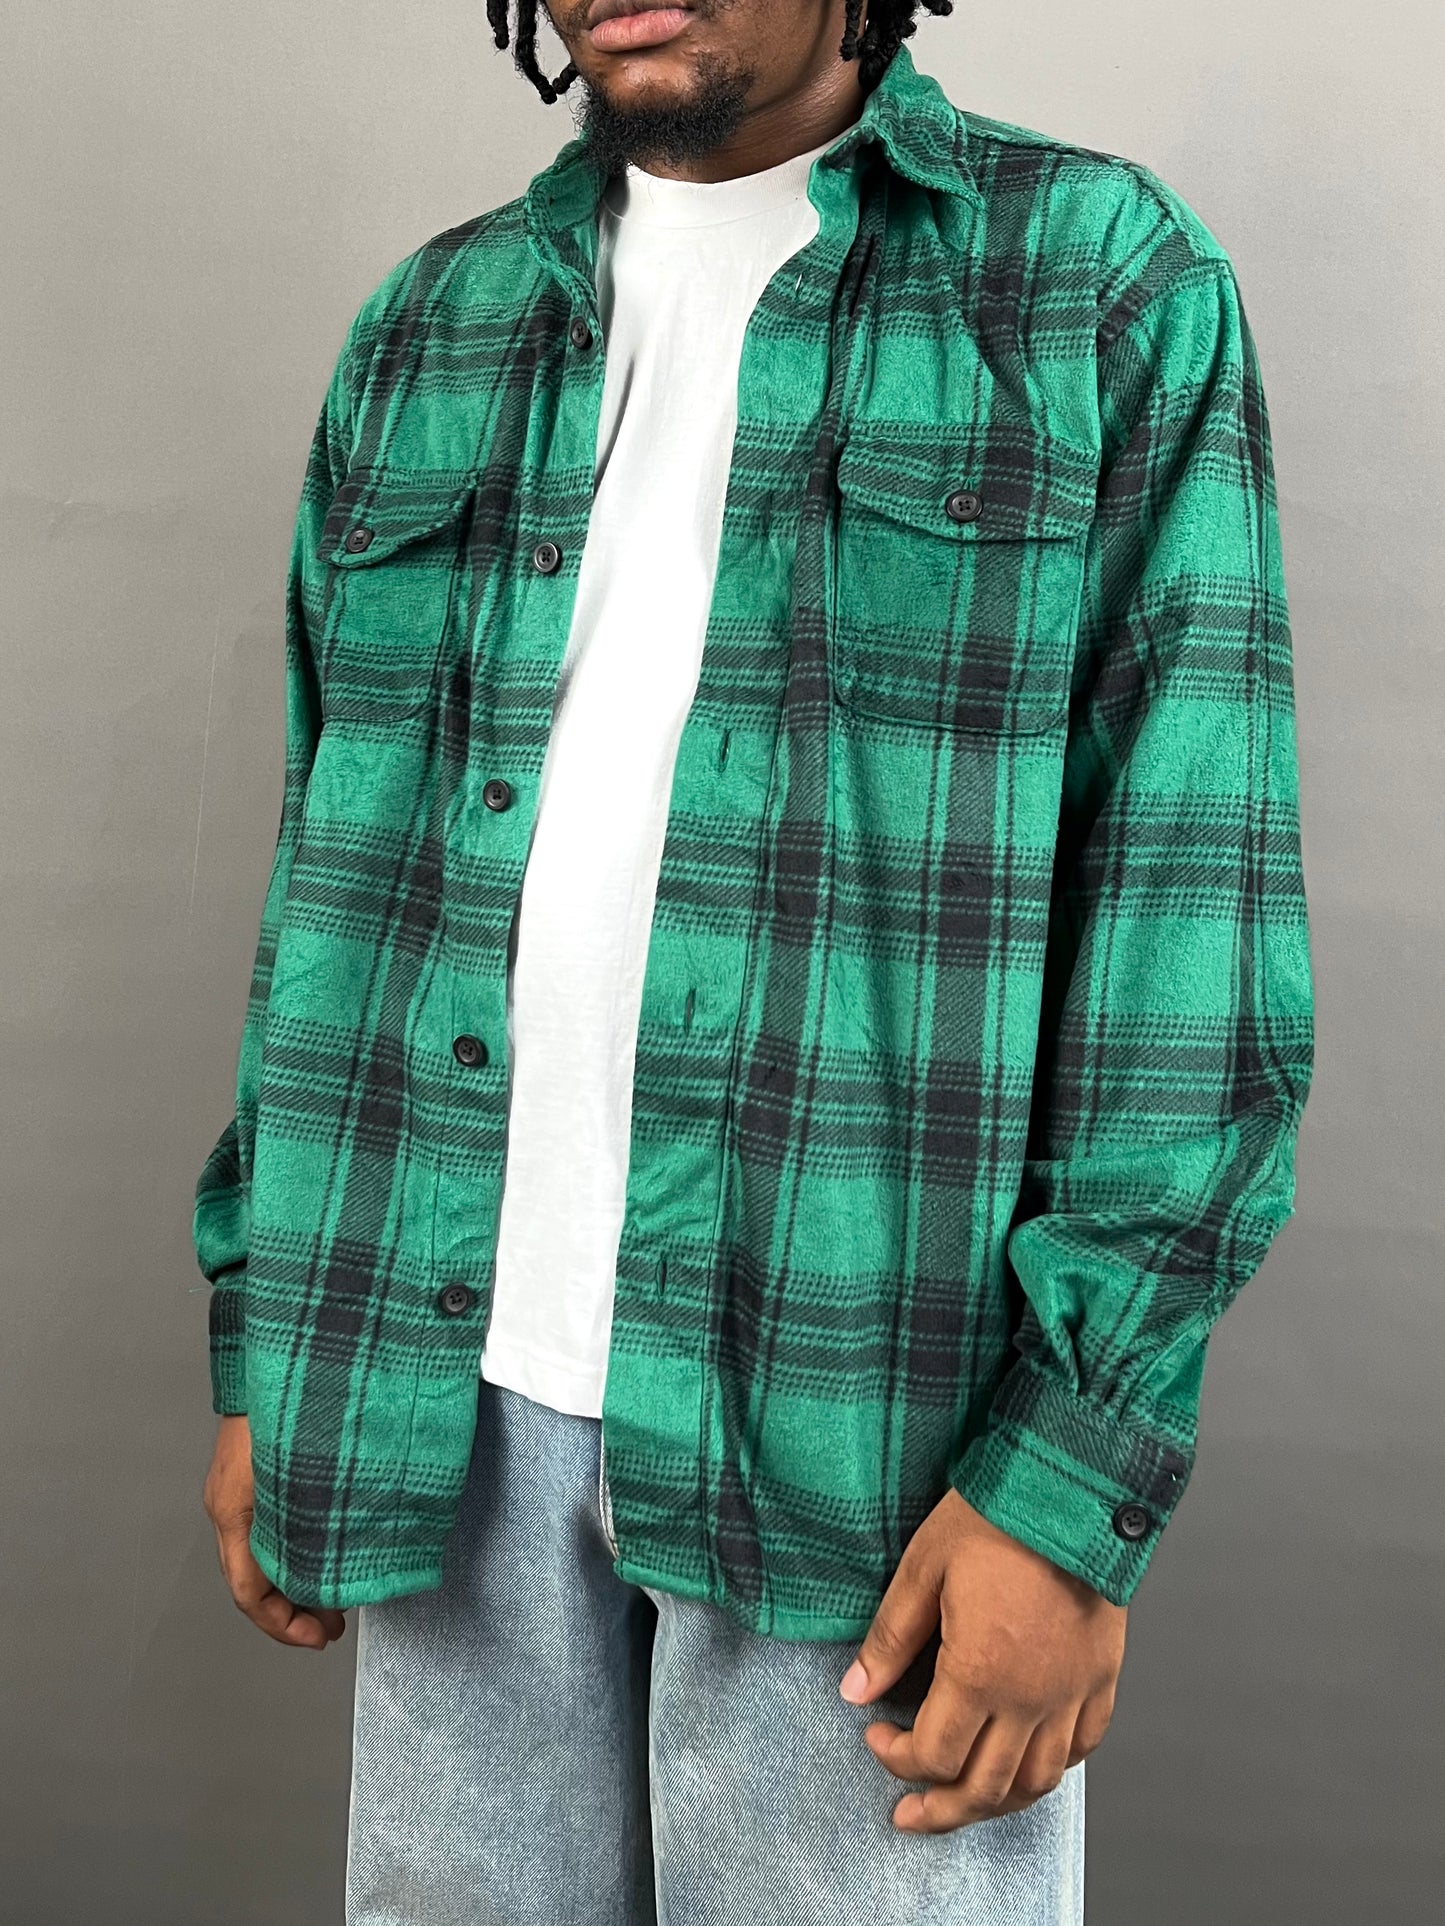 Chaps Flannel Shirt in green